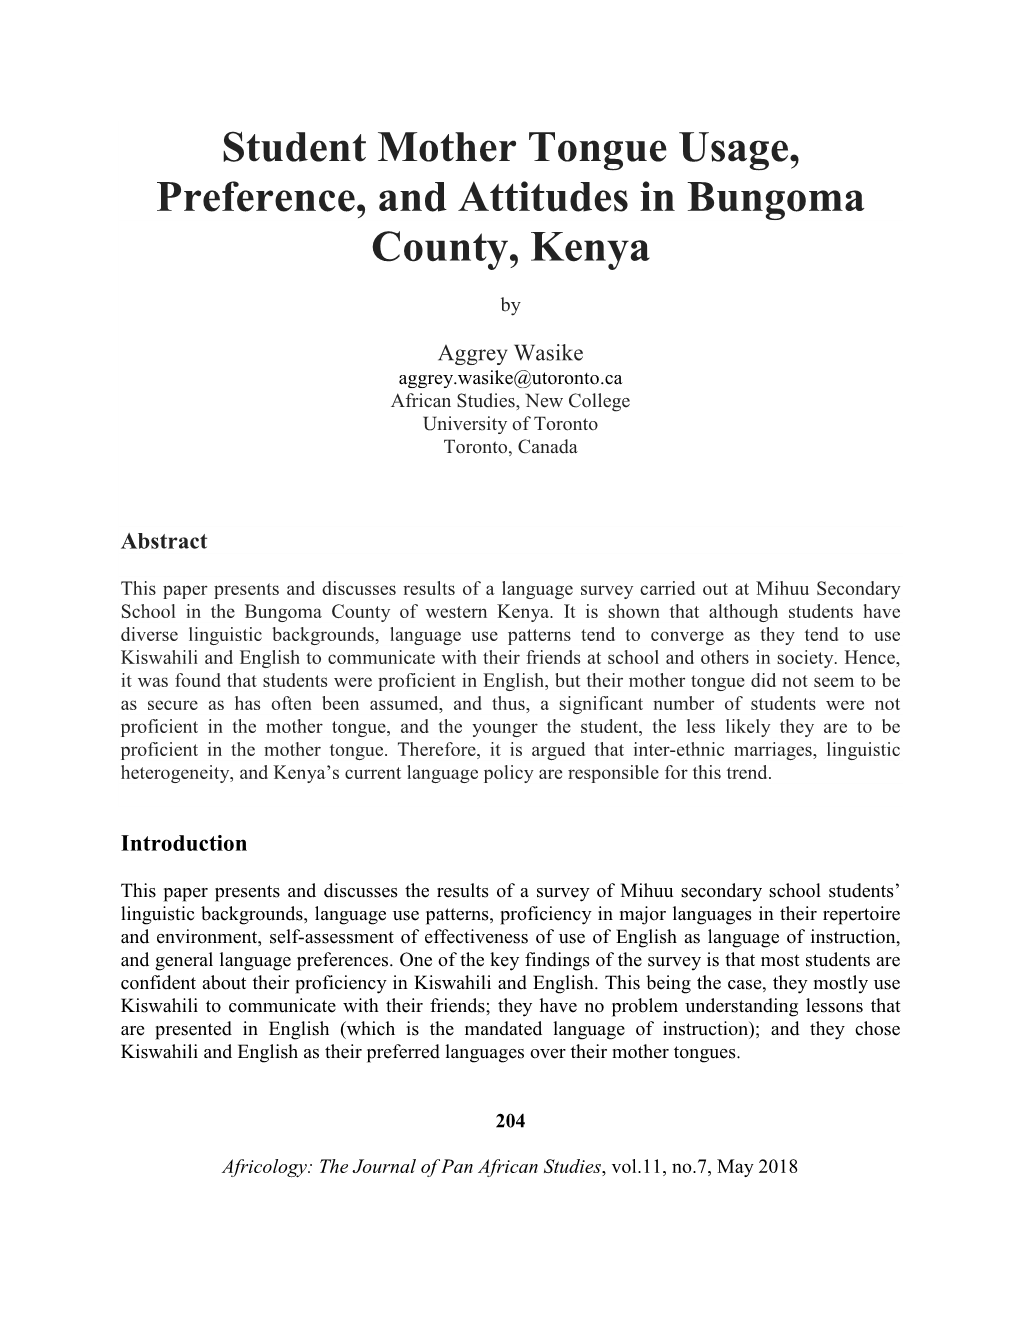 Student Mother Tongue Usage, Preference, and Attitudes in Bungoma County, Kenya